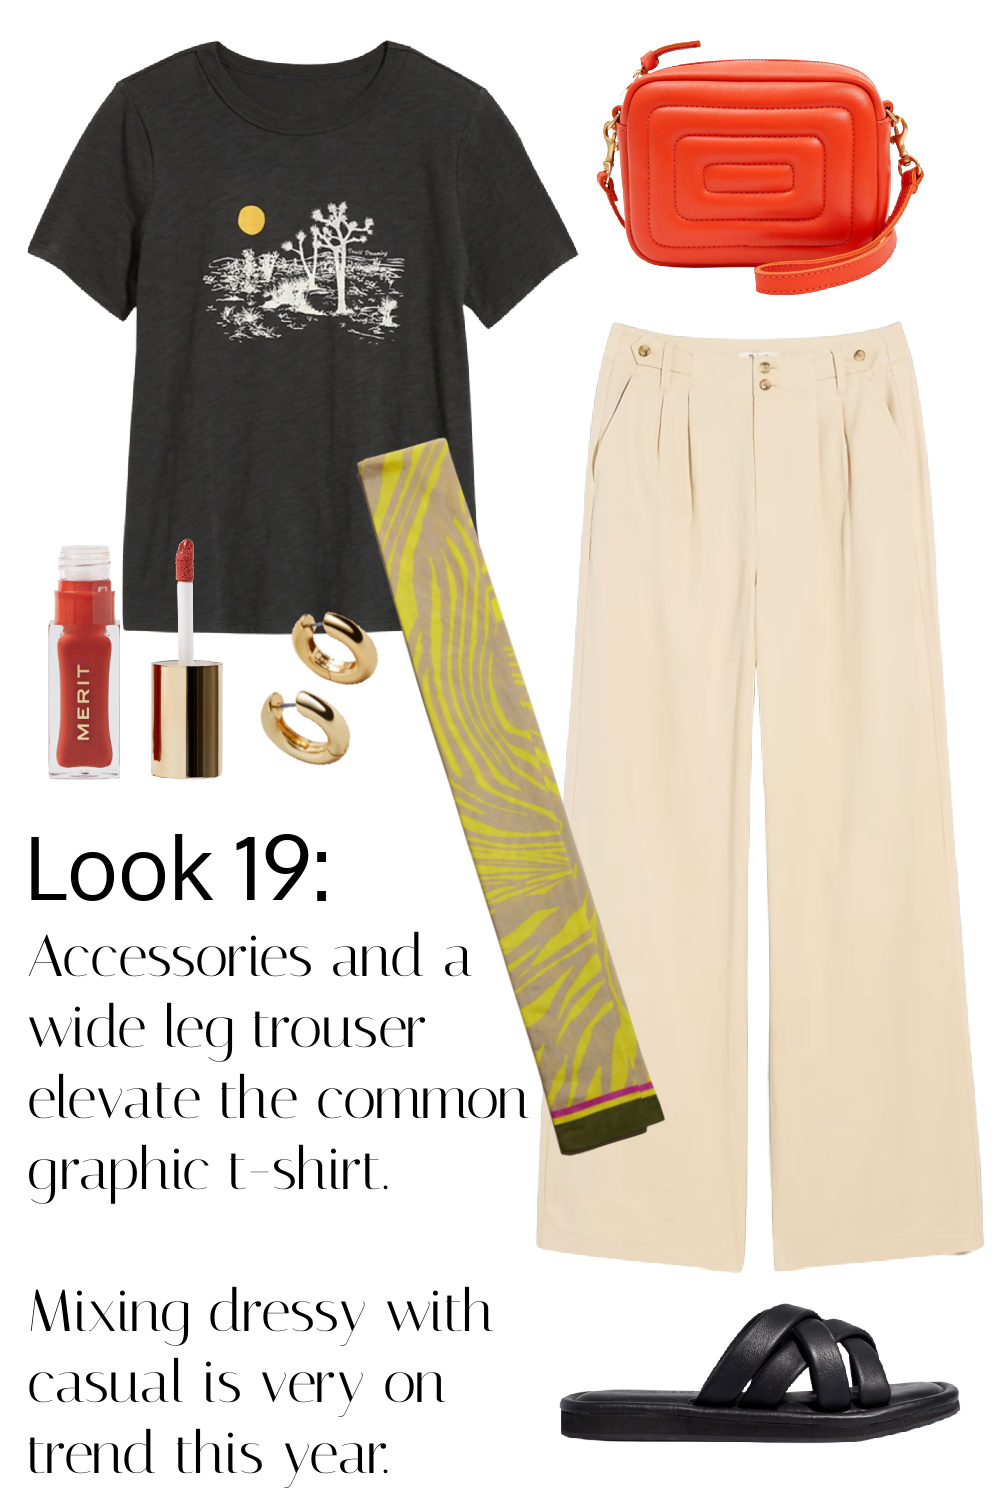 The same look as the last slide but the shirt is replaced with the black graphic tee. Accessories and wide leg trousers elevate the common graphic t-shirt. Mixing dressy with casual is very on trend this year.